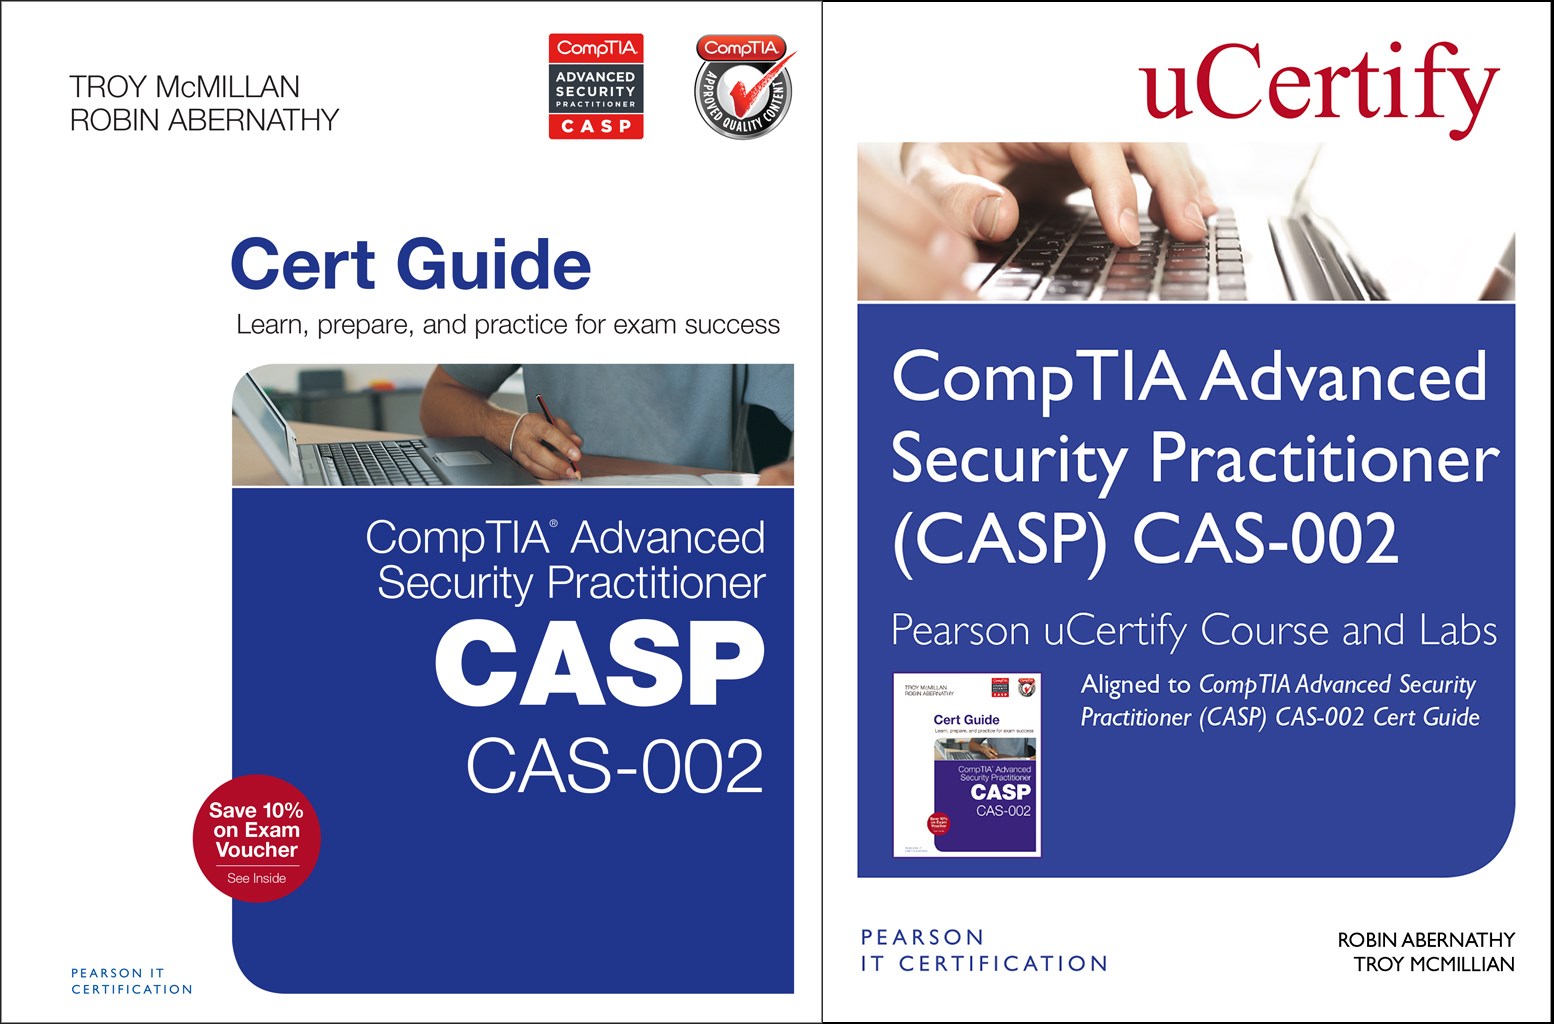 CompTIA Advanced Security Practitioner (CASP) CAS-002 Cert Guide, Pearson uCertify Course and uCertify Labs Bundle